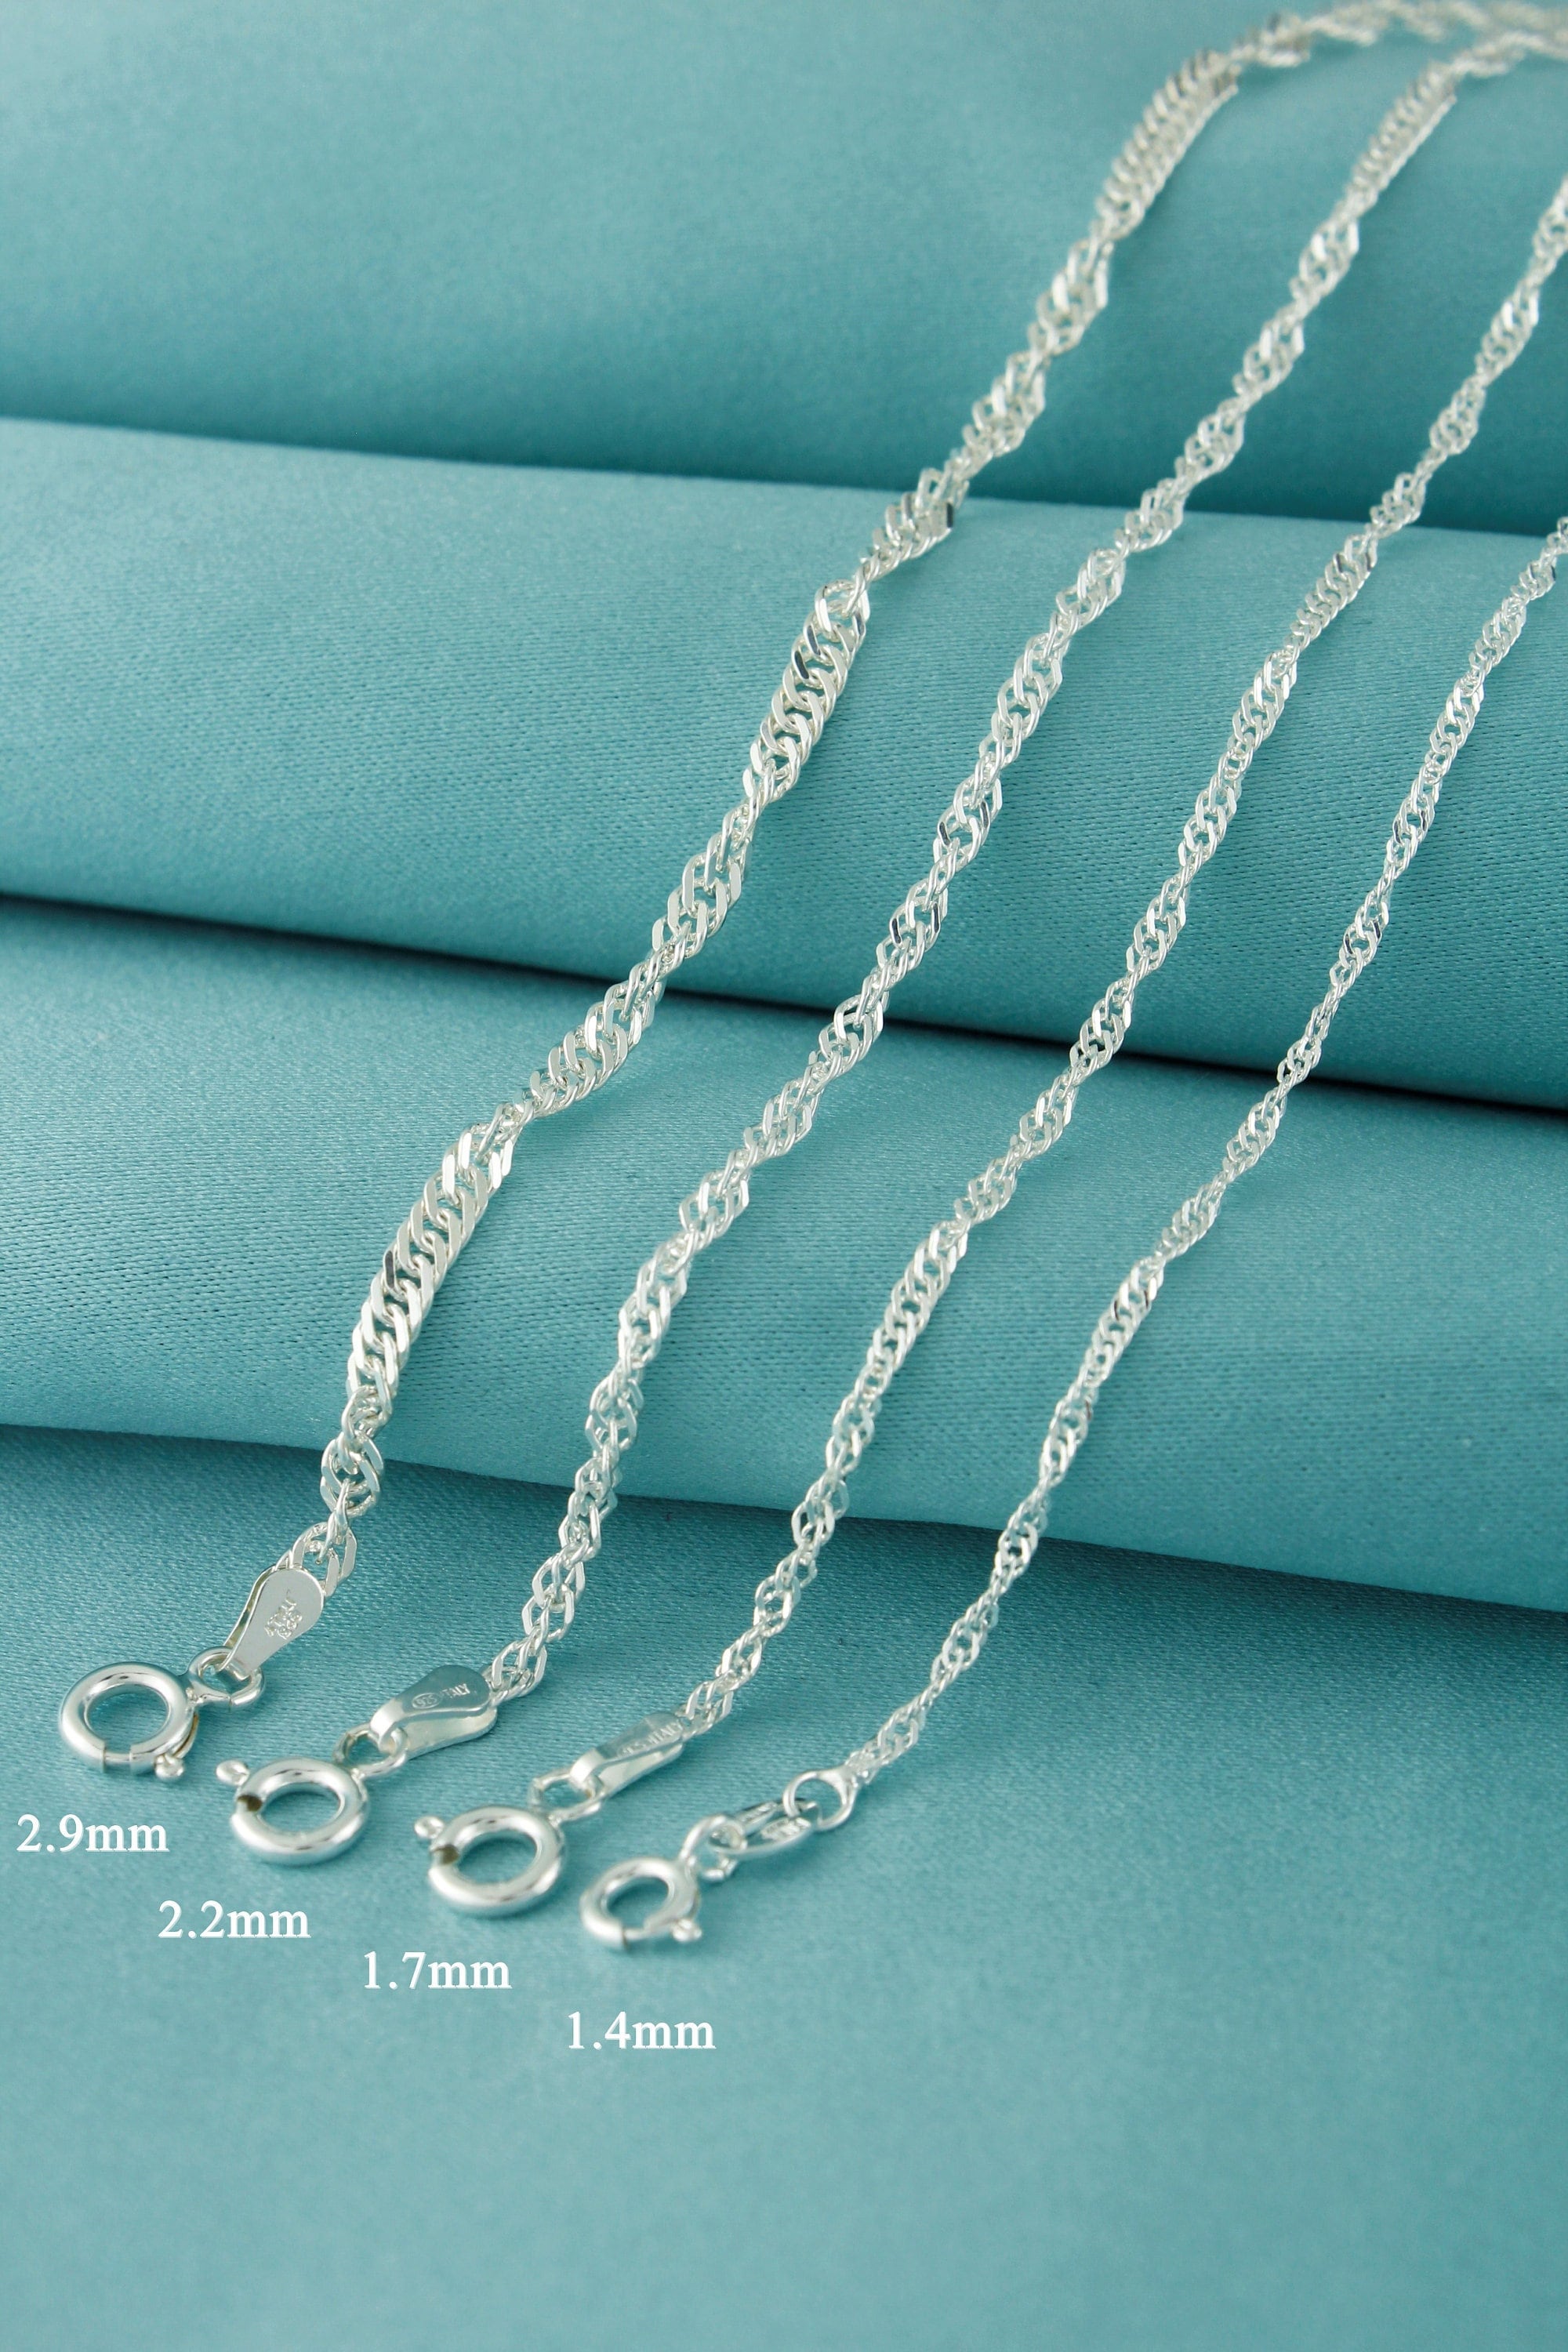  925 Sterling Silver Chain Necklace Chain for Women Girls Cable  Chain Necklace Upgraded Spring-Ring Clasp - Thin & Sturdy - Italian Quality  16/18/20/22/24 Inch (20 INCH) : Handmade Products